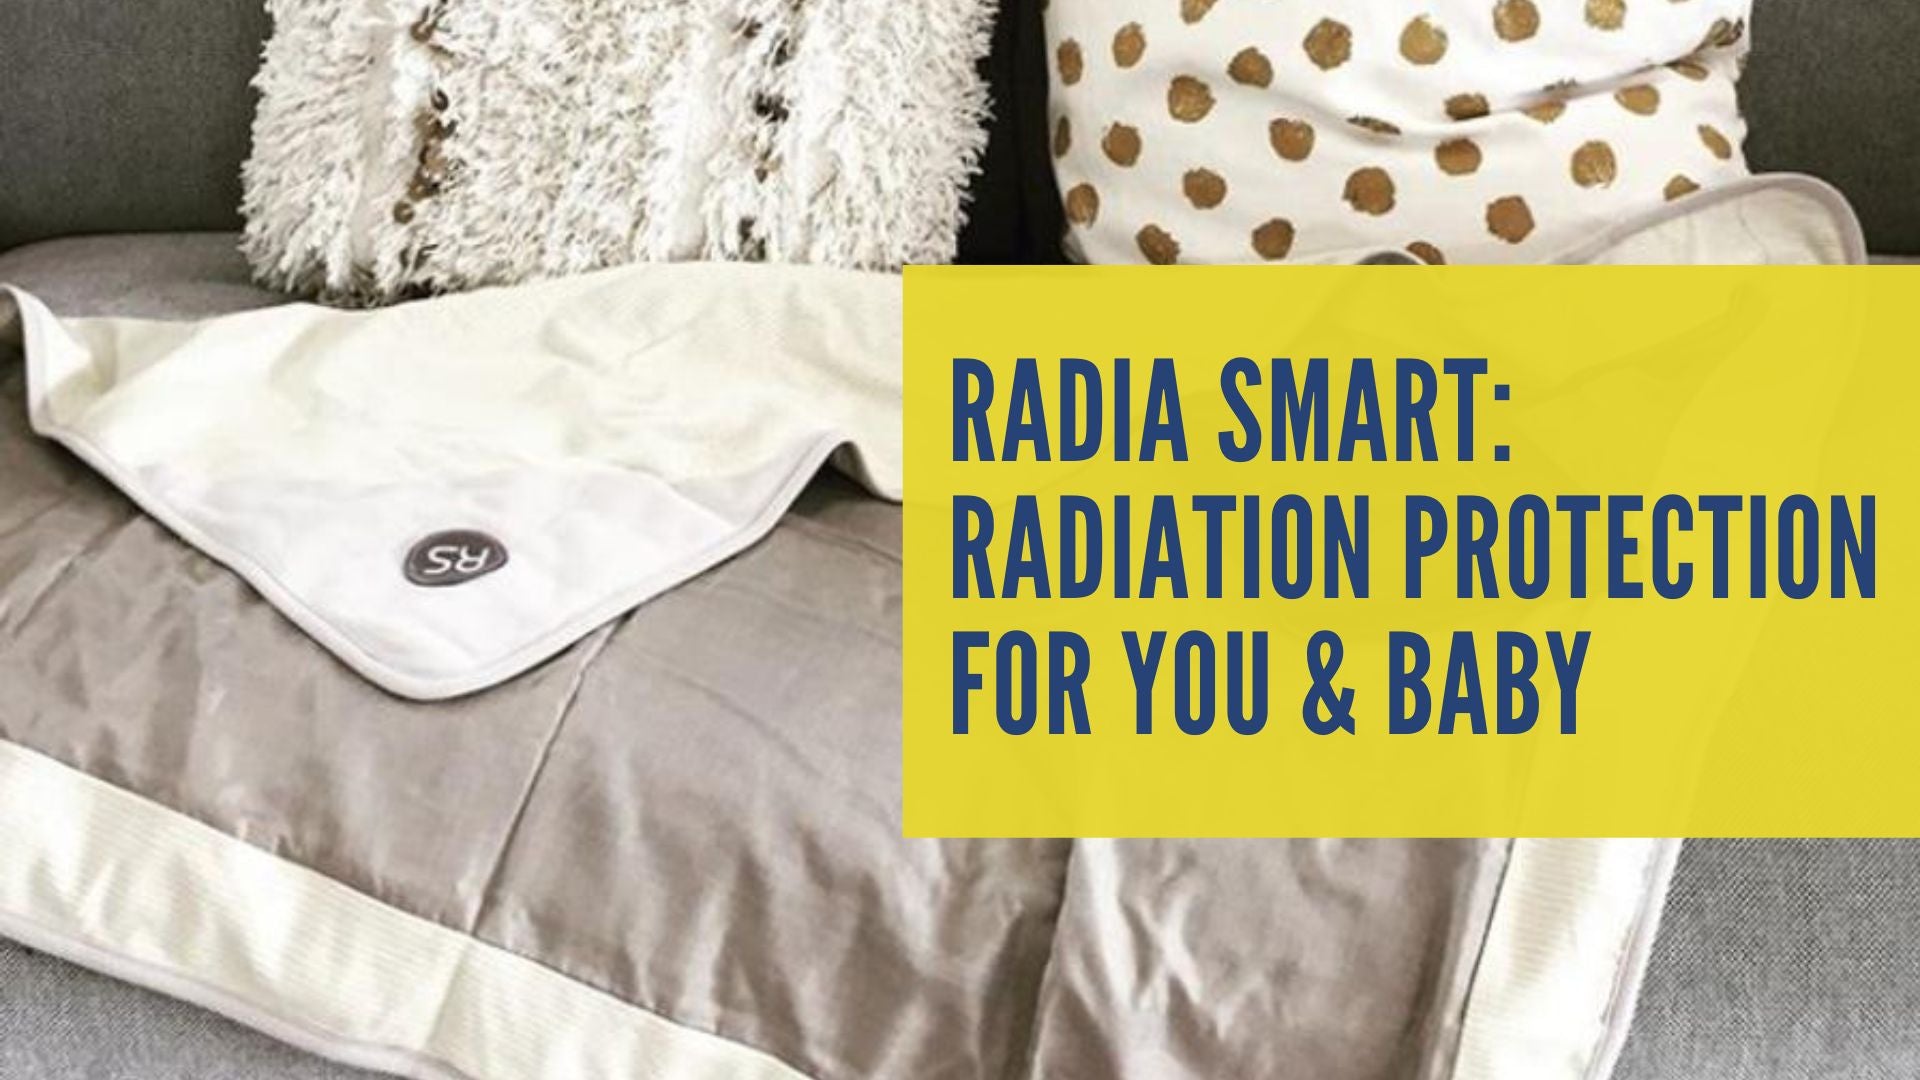 Radia Smart: Radiation Protection for bump & baby